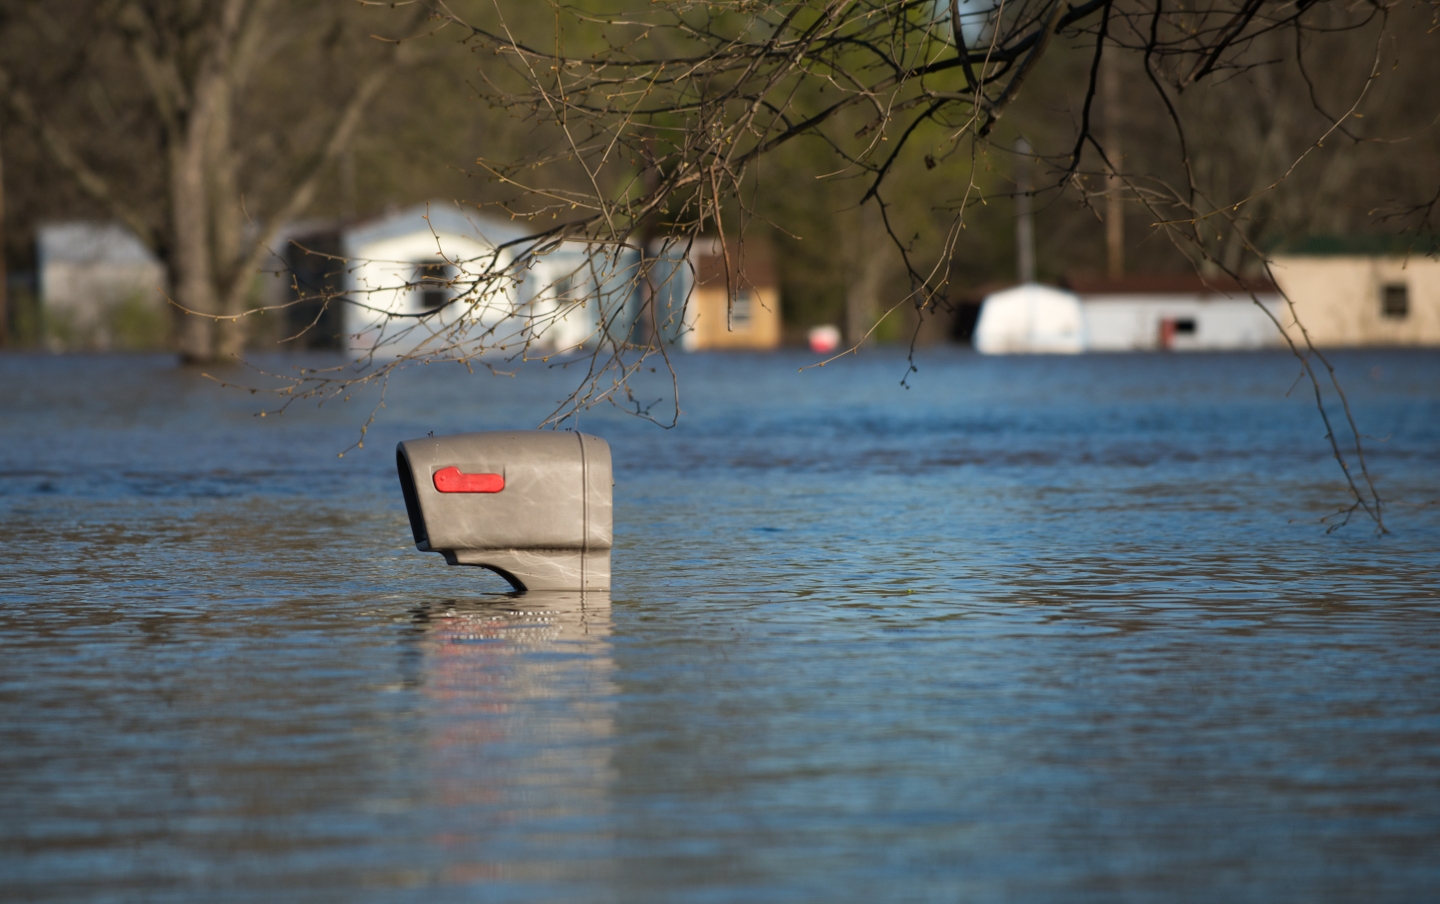 Mailbox shown above water in a flooded neighborhood